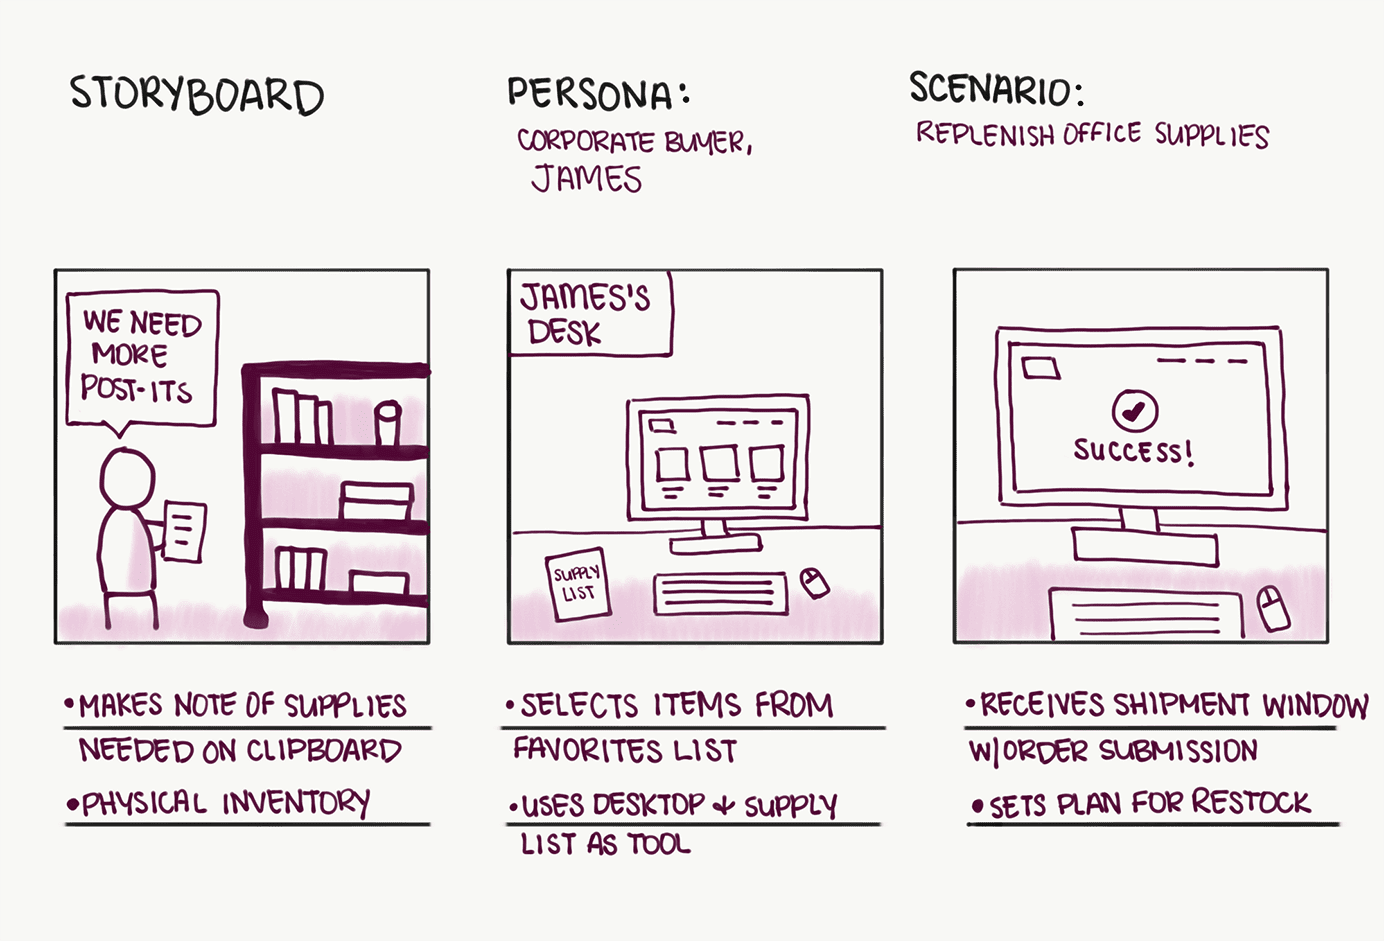 Storyboarding uses visuals to describe specific scenarios that create a memorable experience for your team and stakeholders.